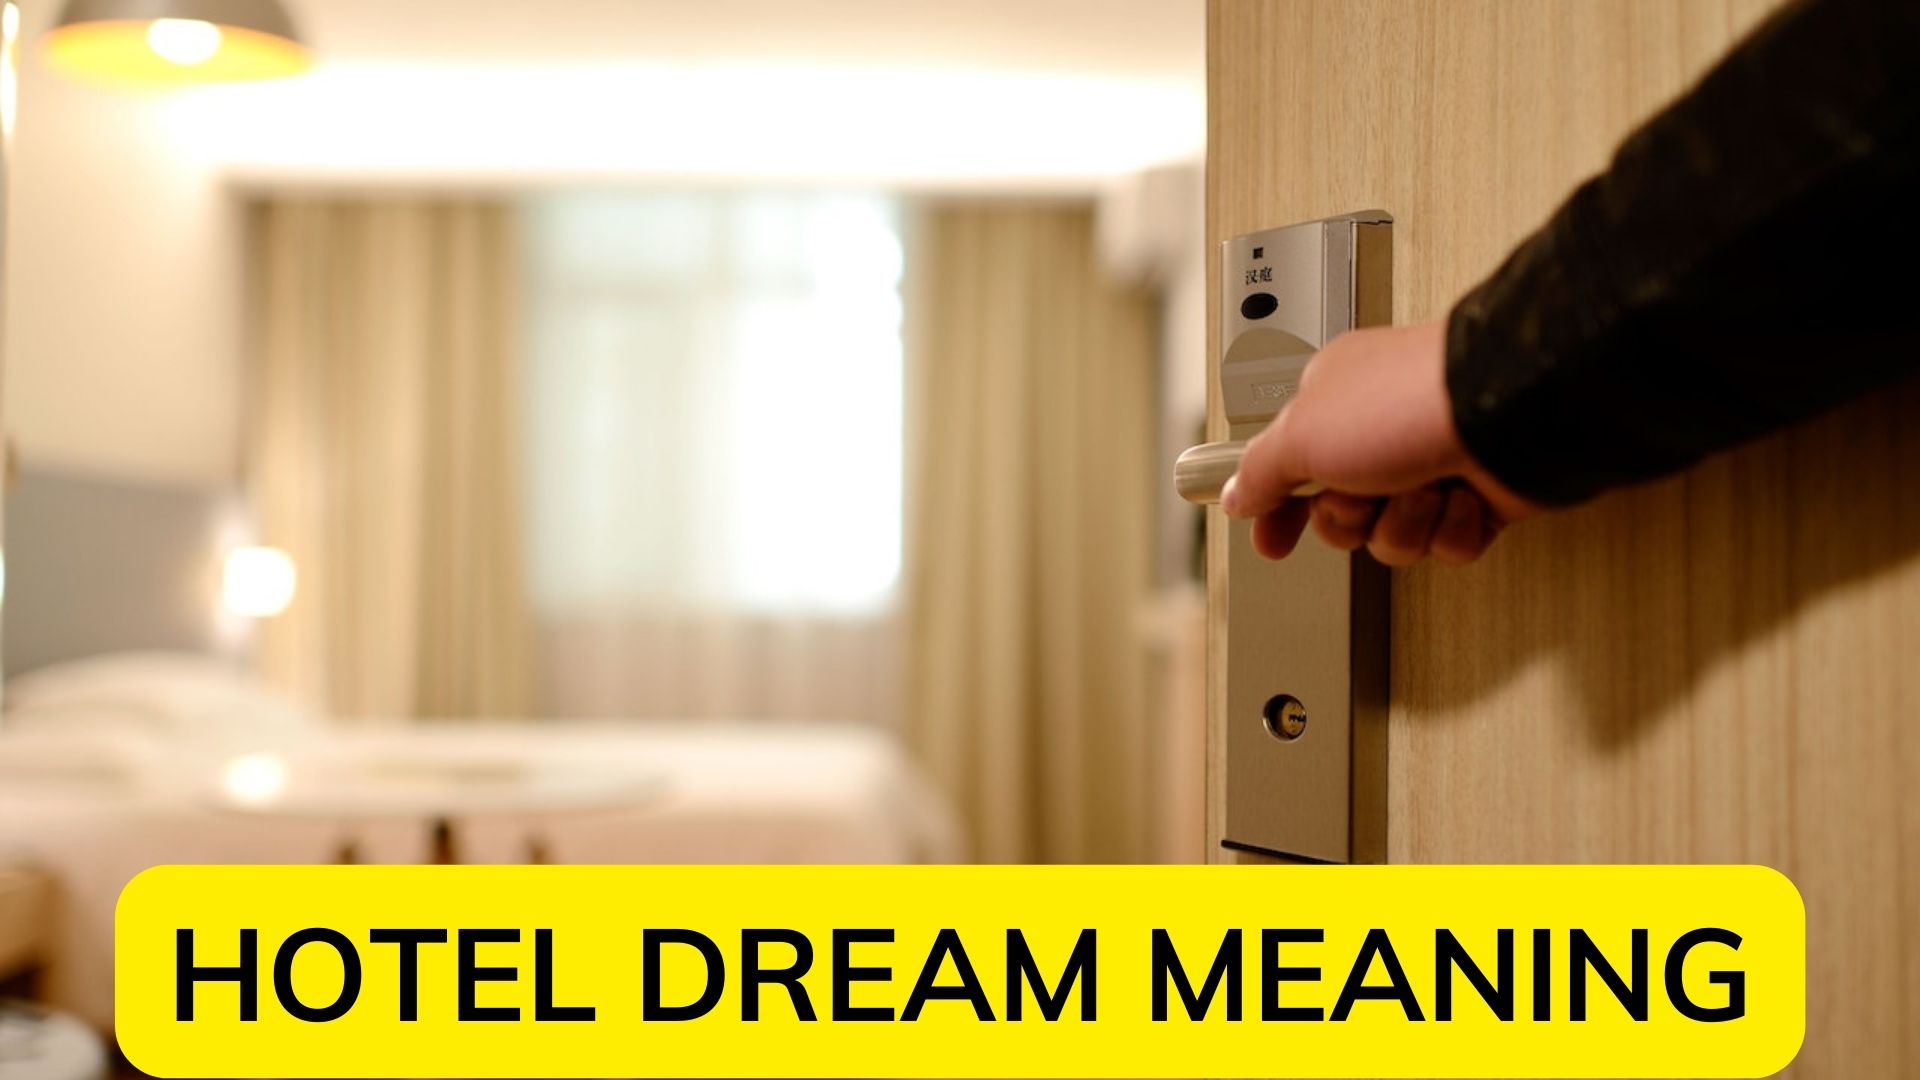 Hotel Dream Meaning -  A Sense Of Insecurity